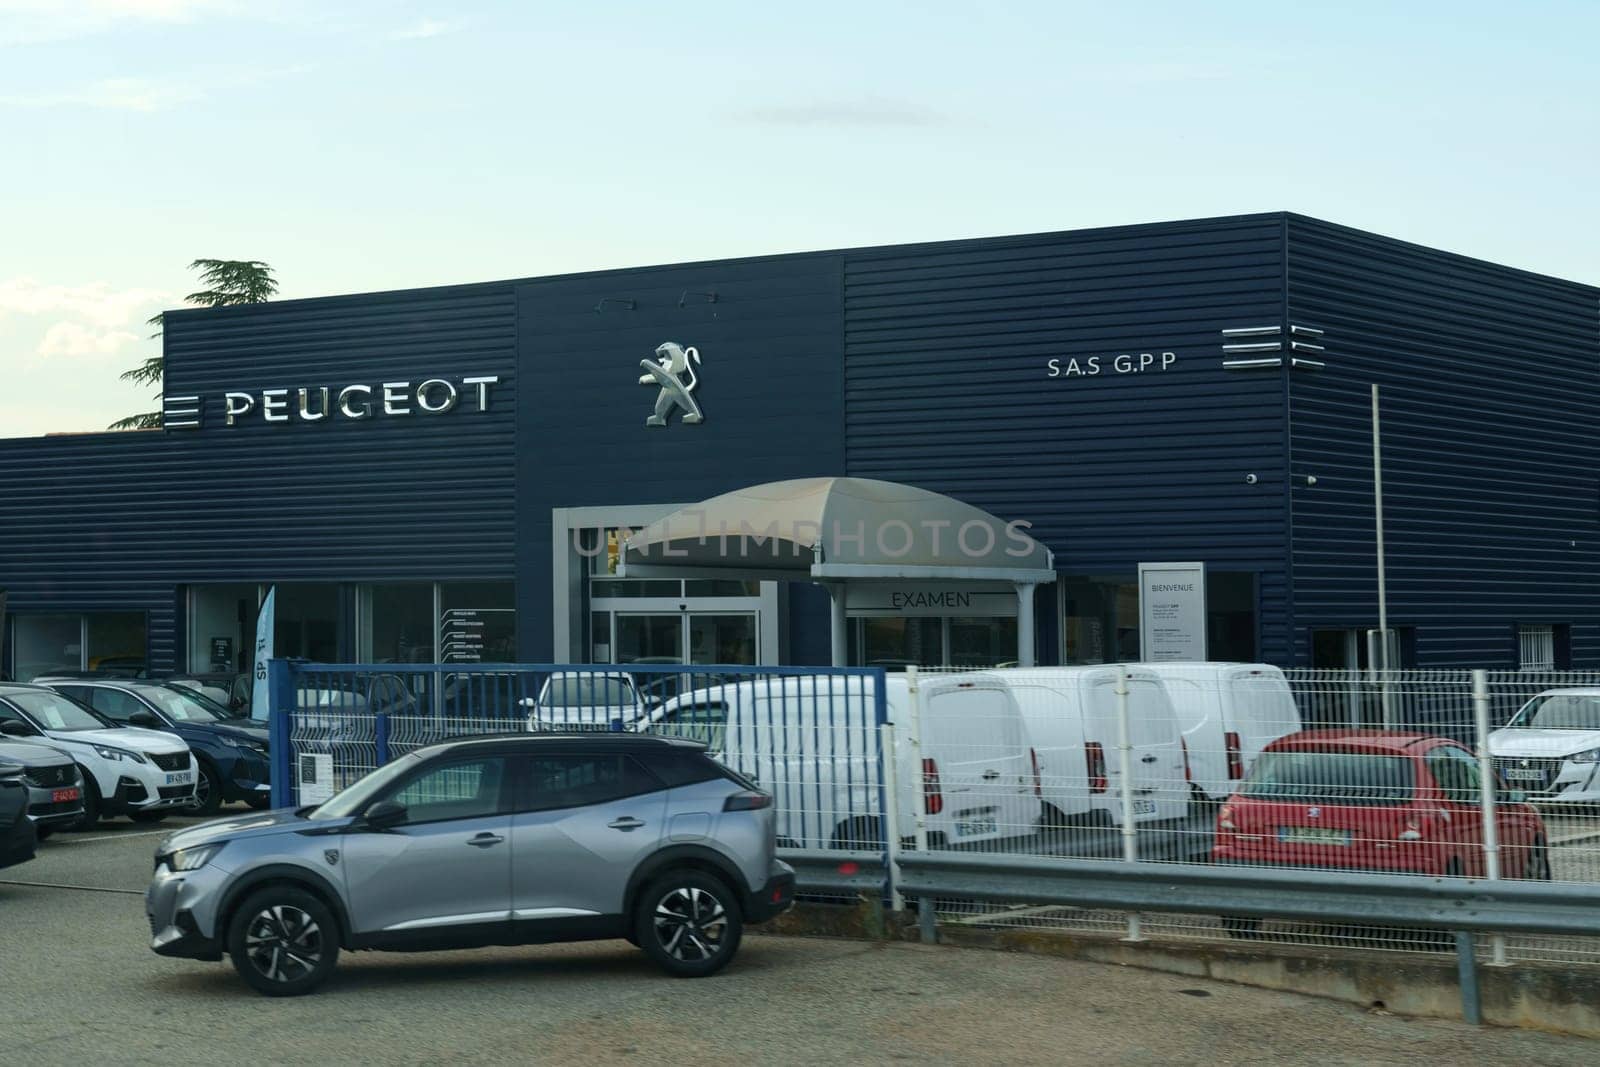 Peugeot Dealership Exterior Displaying New and Used Vehicles at Dusk by Sd28DimoN_1976